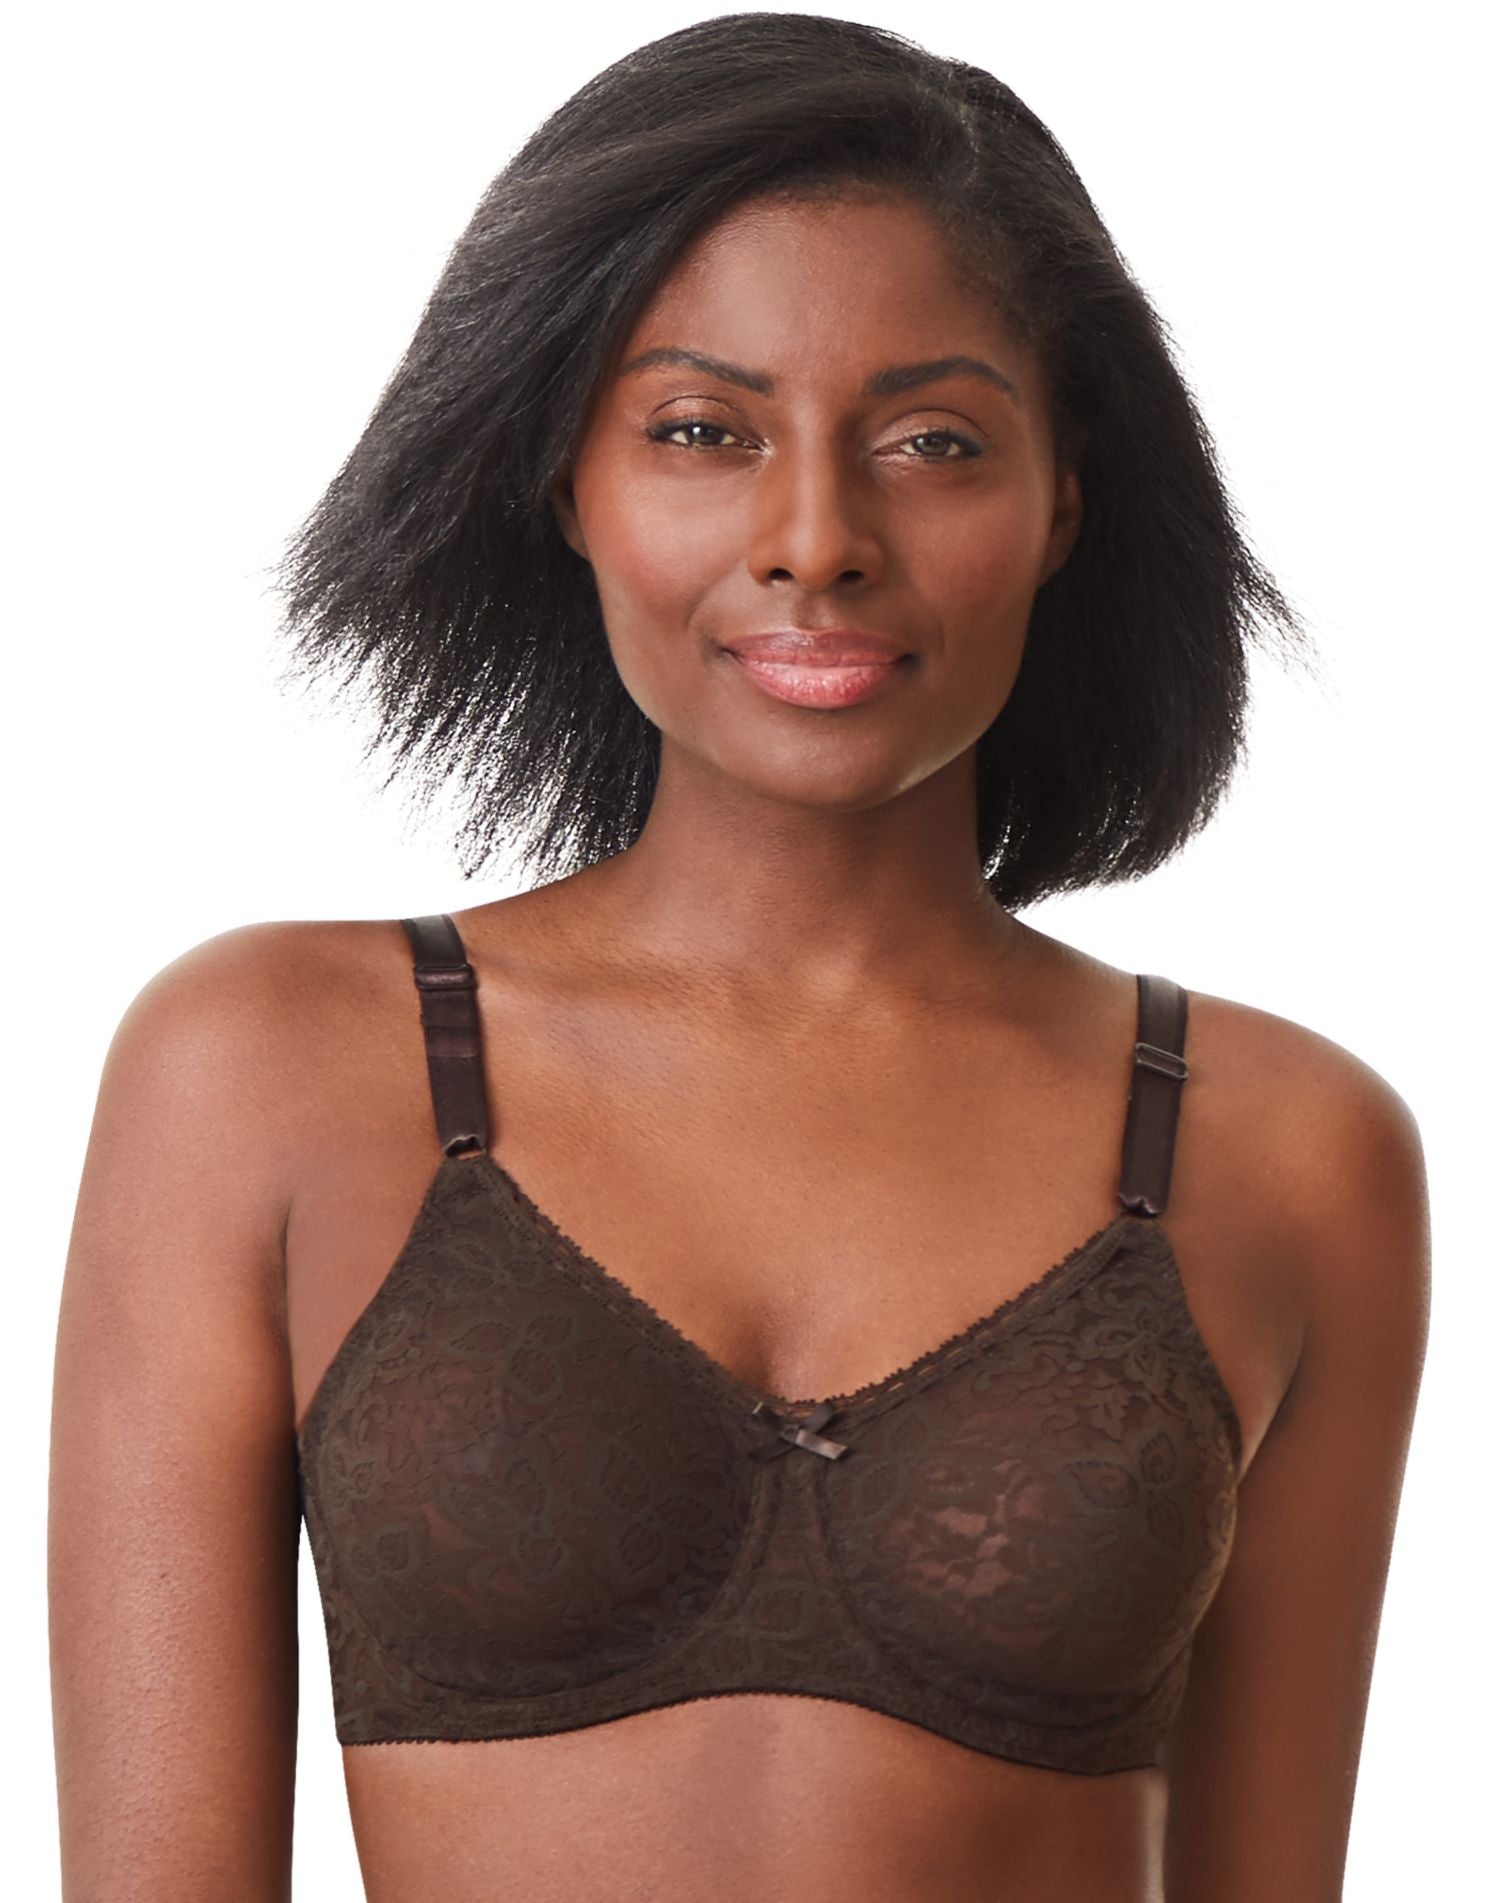 NWT BALI Lace 'n Smooth 2-Ply Seamless Underwire Bra Nude 36D Retail $40